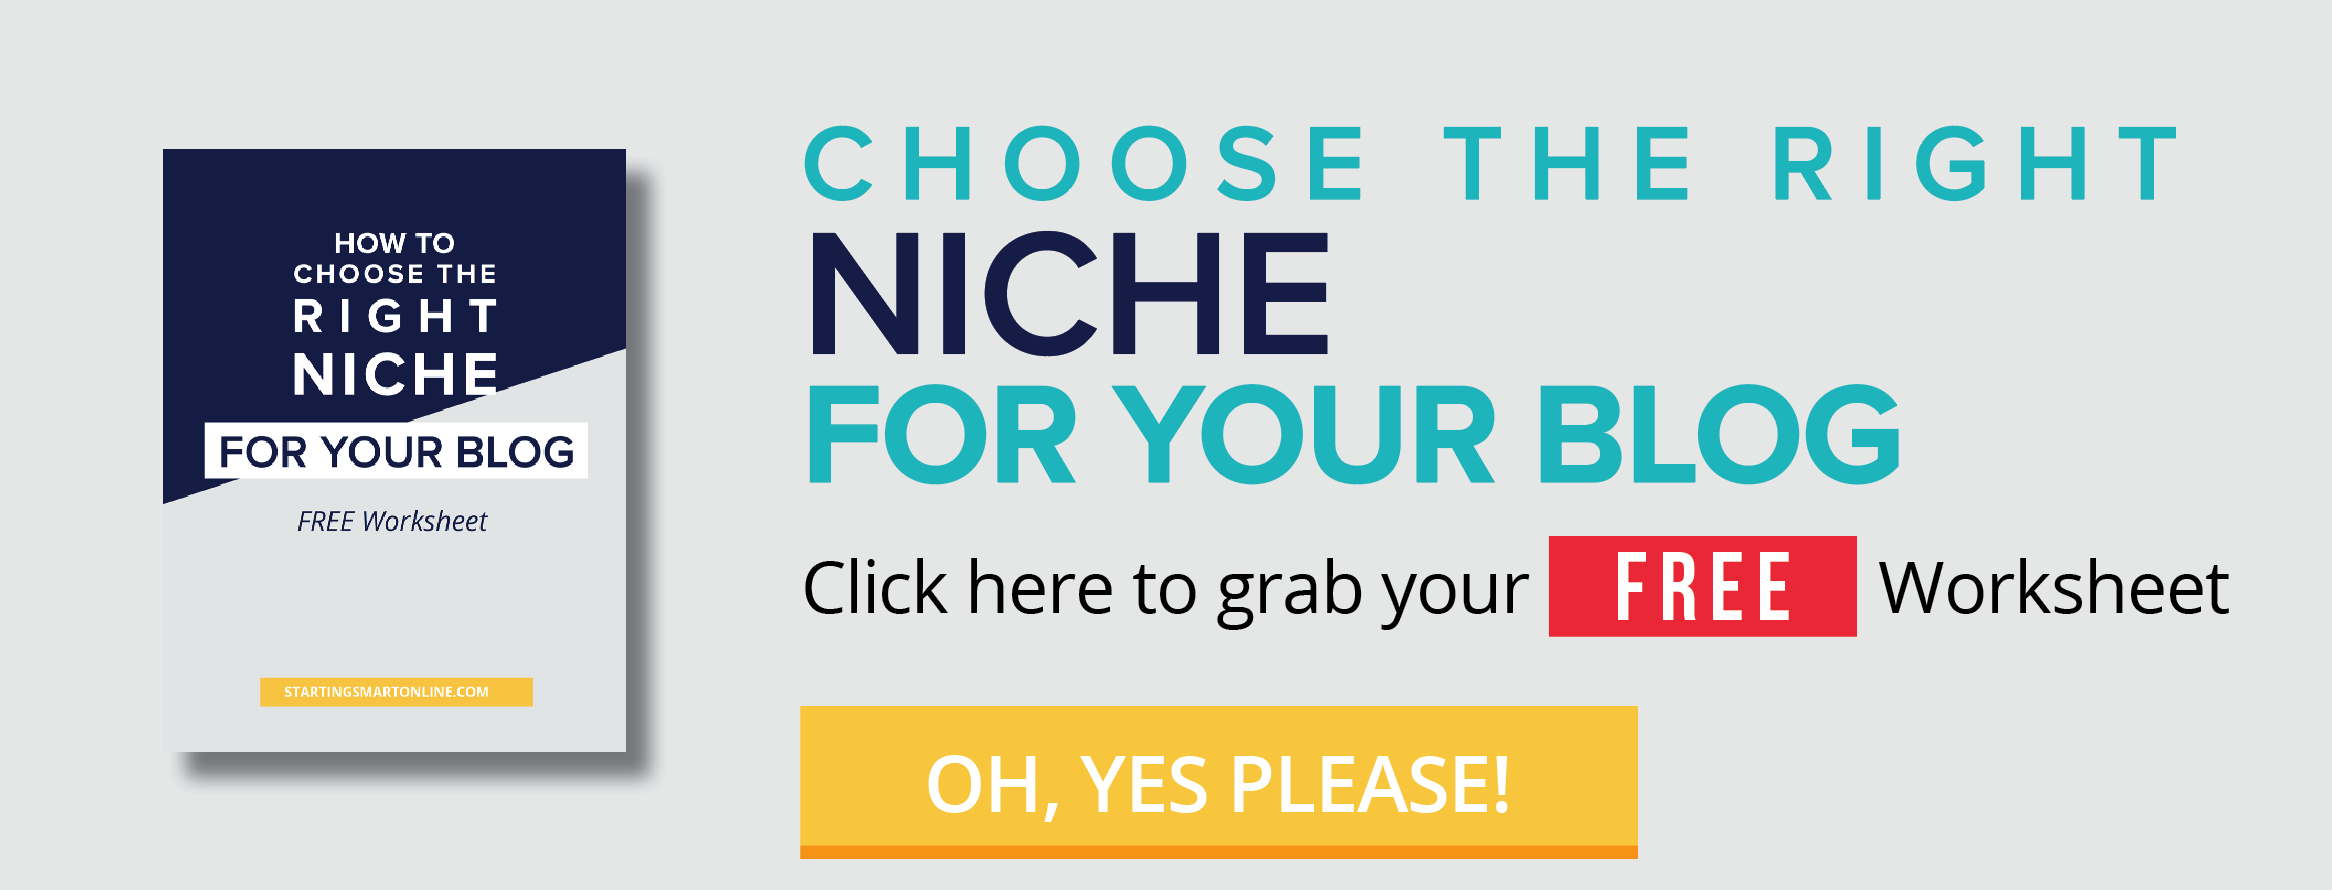 How to Choose the Right Niche for Your Blog